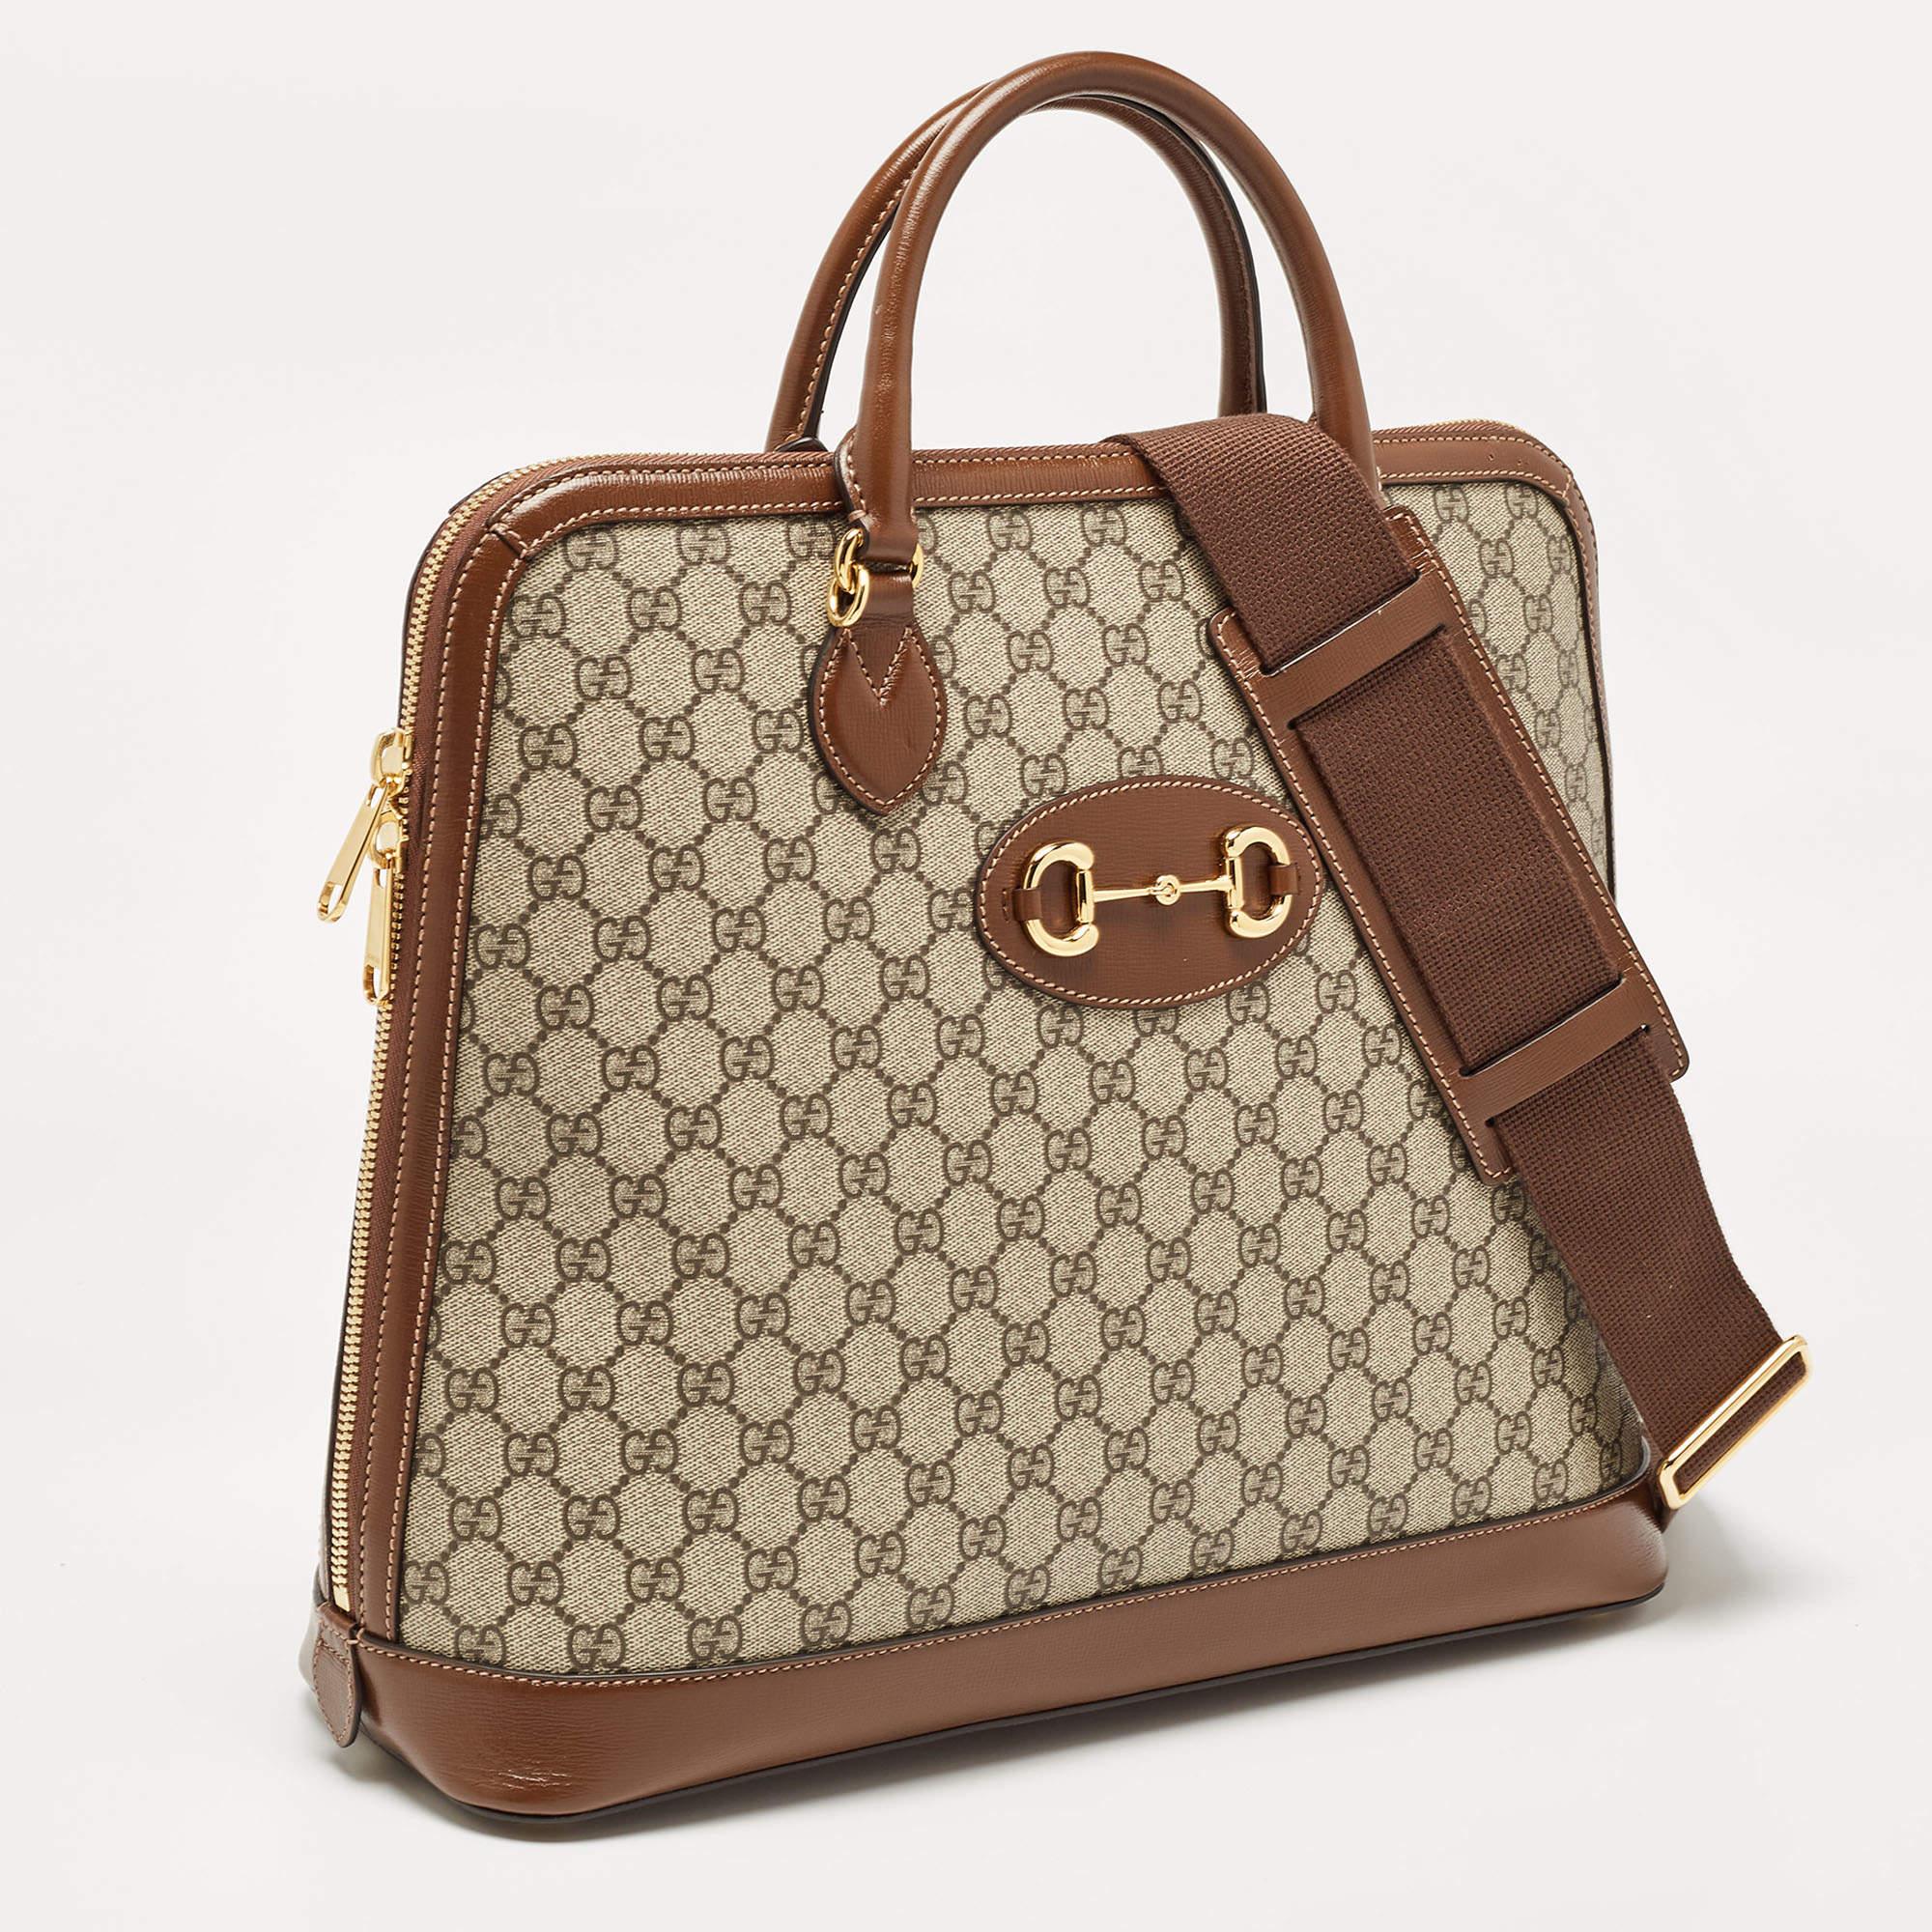 Gucci Brown/Beige GG Supreme Canvas and Leather Horsebit 1955 Duffel Bag For Sale 10